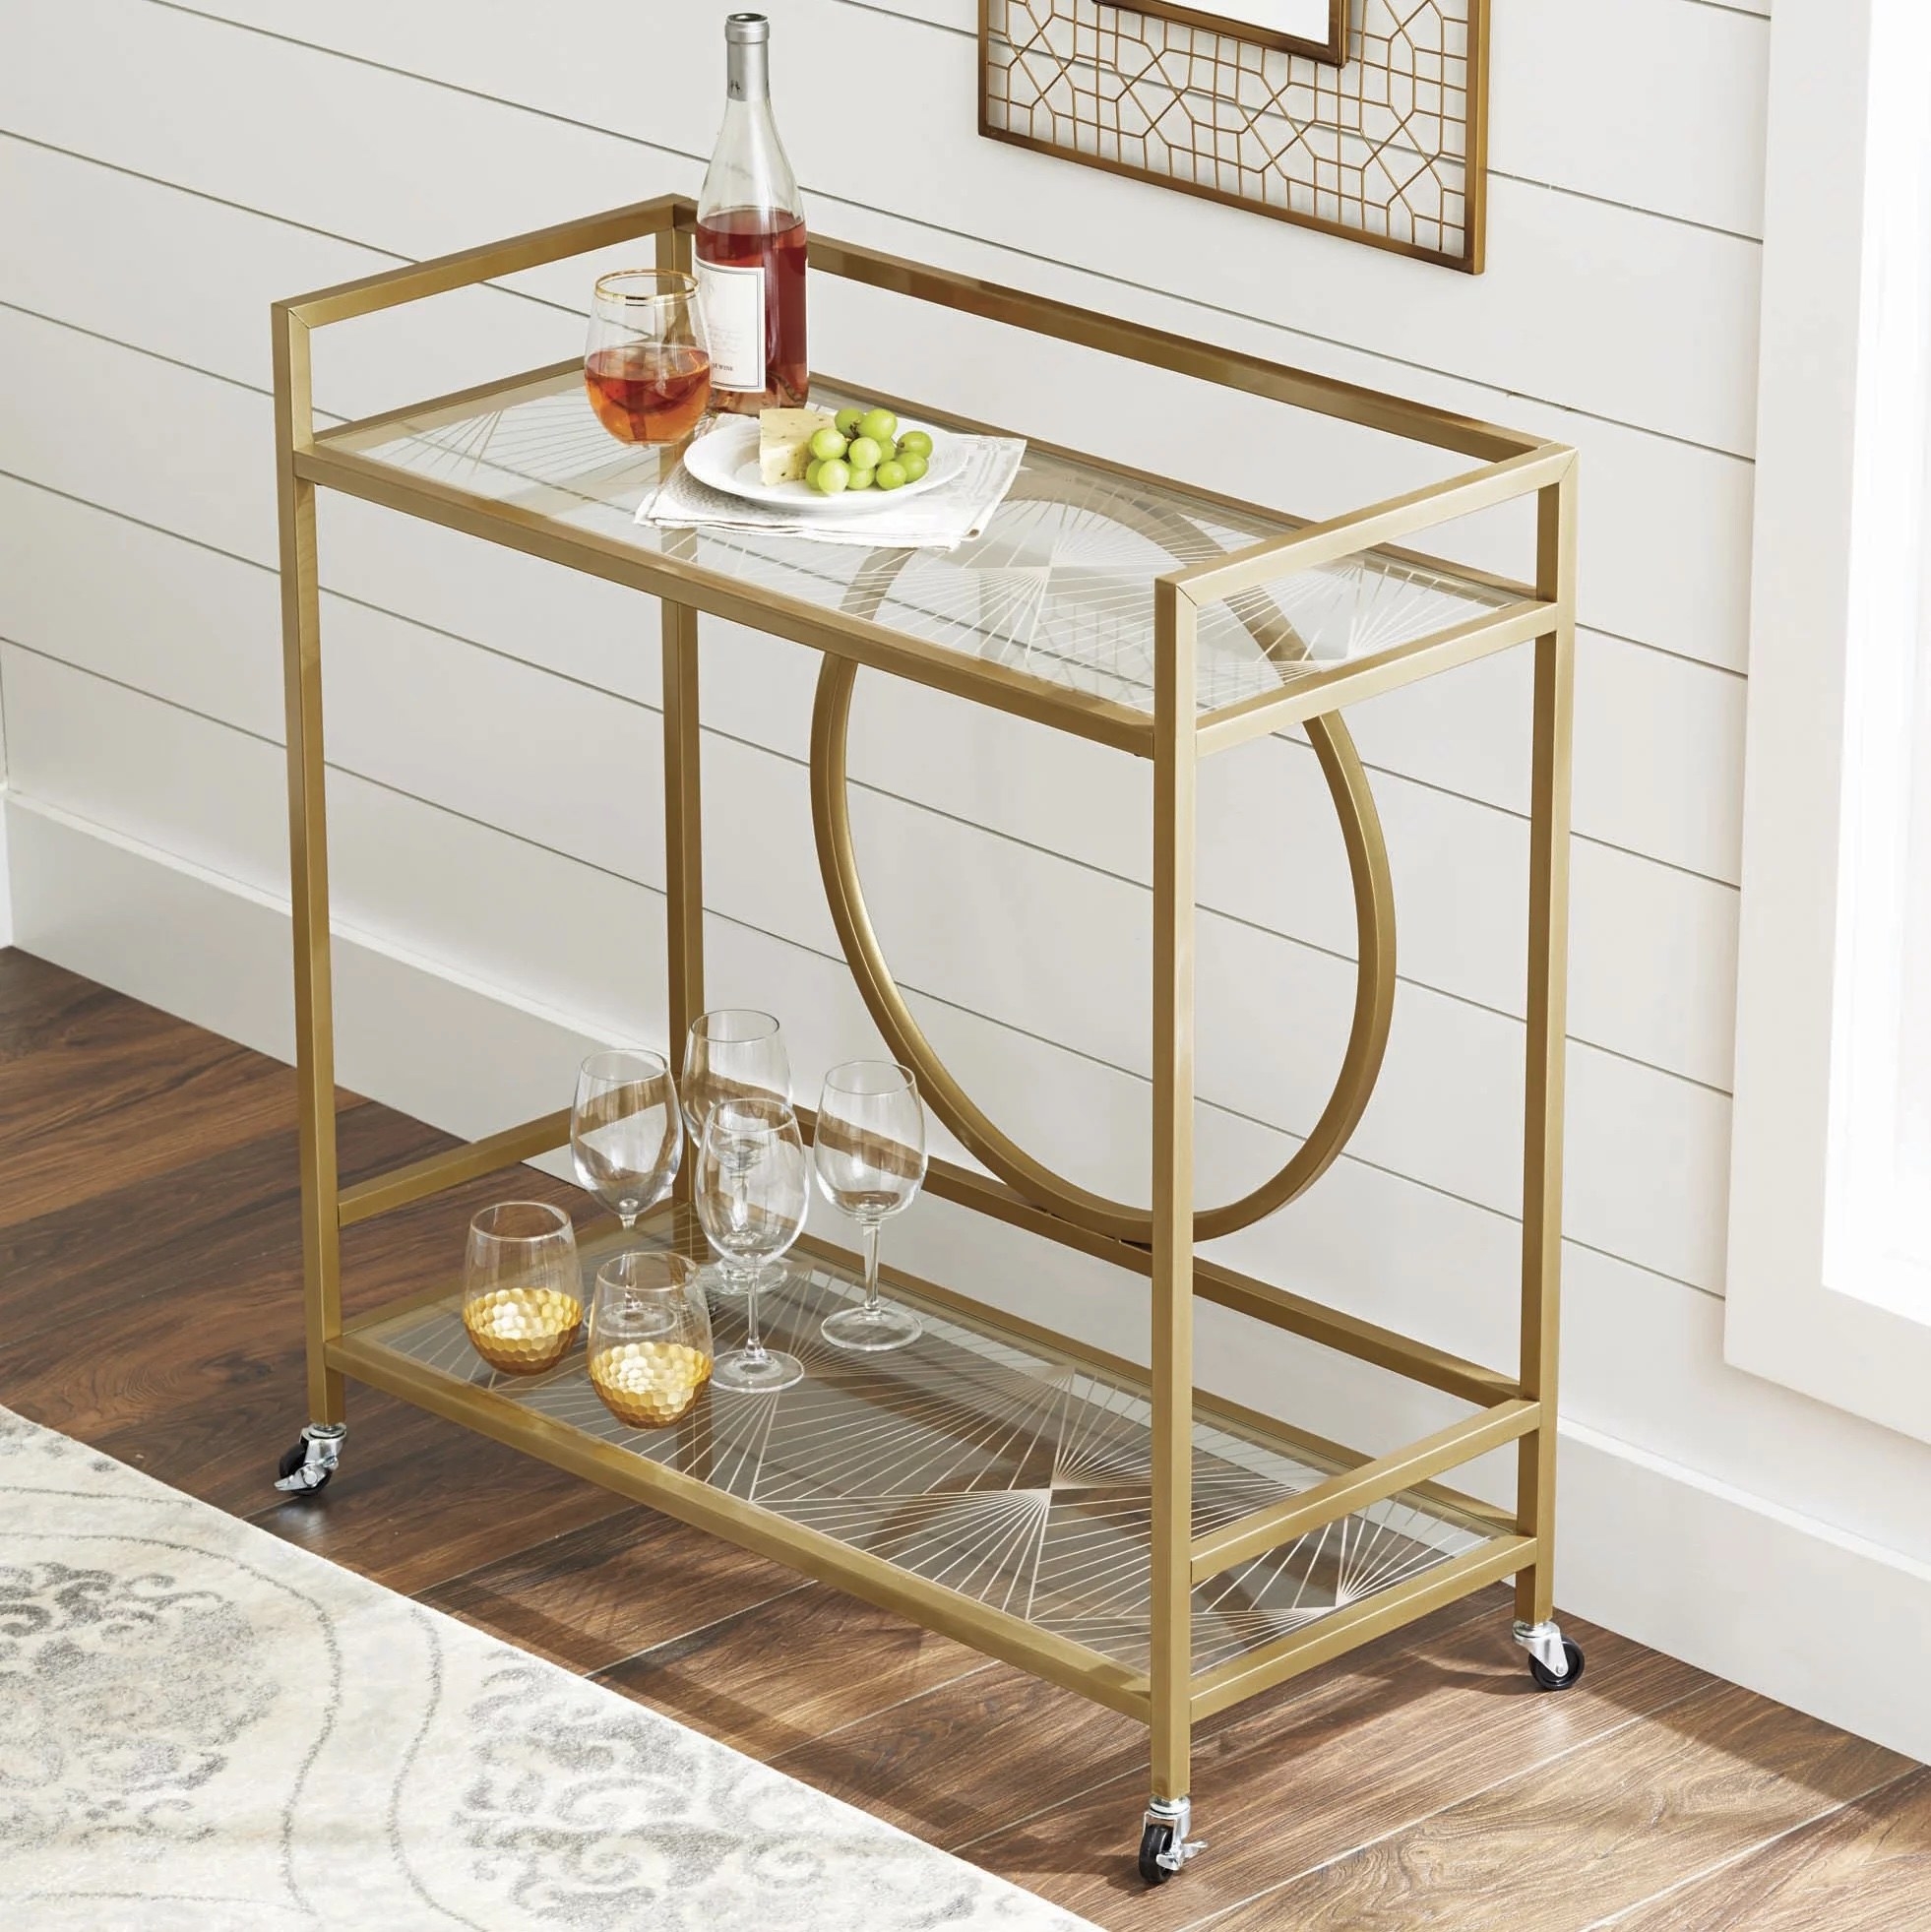 A gold bar cart with wine glasses on it anda bottle of wine and plate of cheese and grapes